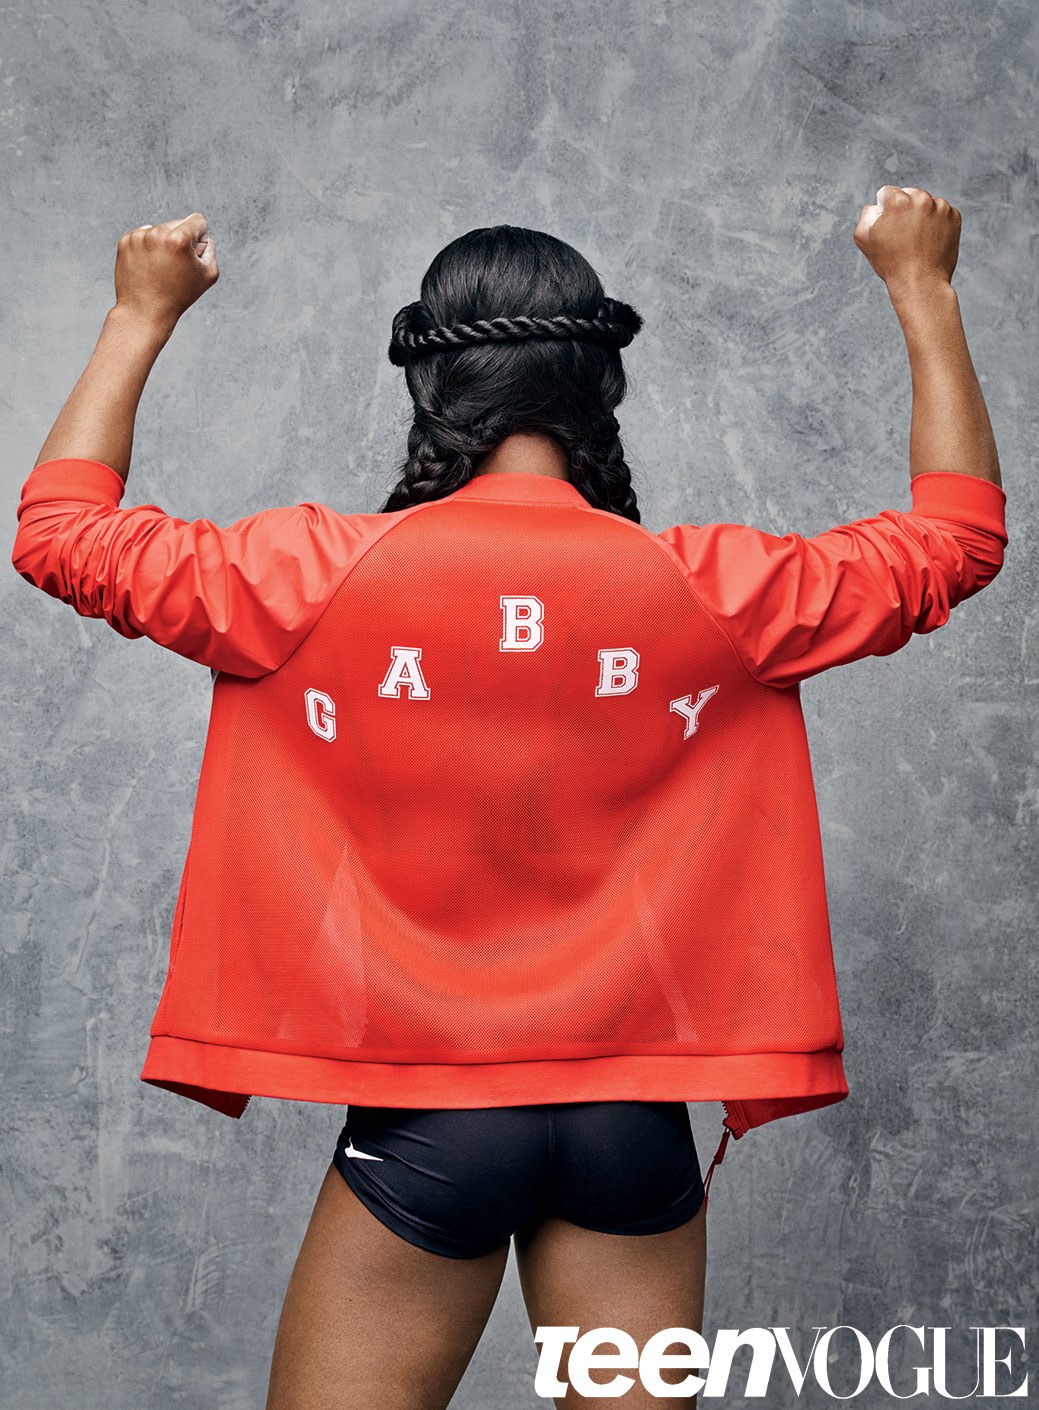 Gabby Douglas: "I don't have to apologize to anyone about my body. My body is beautiful ...